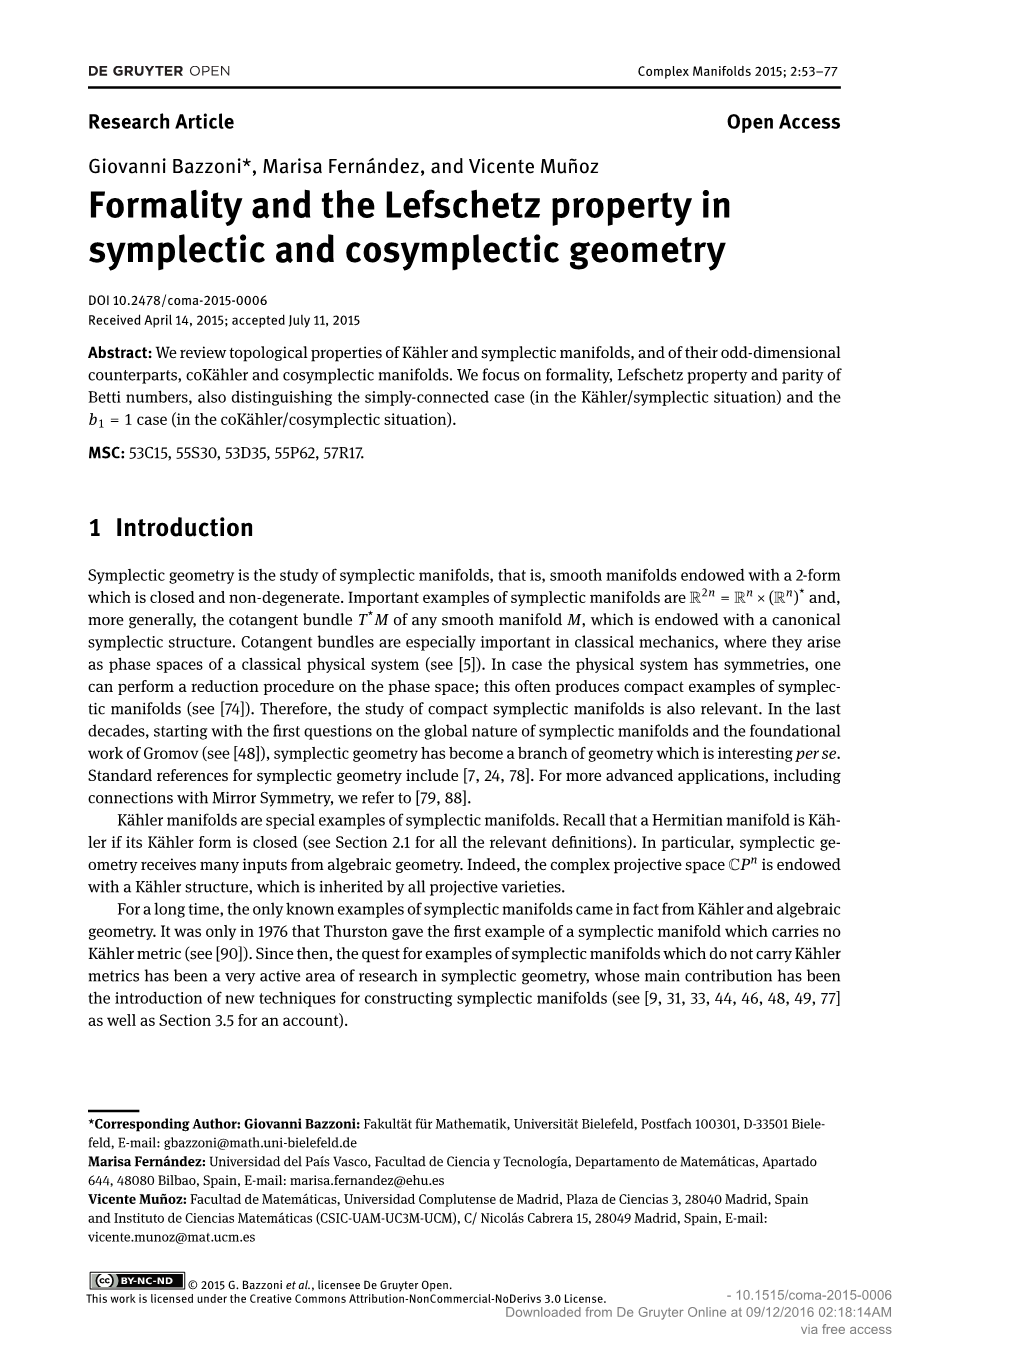 Formality and the Lefschetz Property in Symplectic and Cosymplectic Geometry